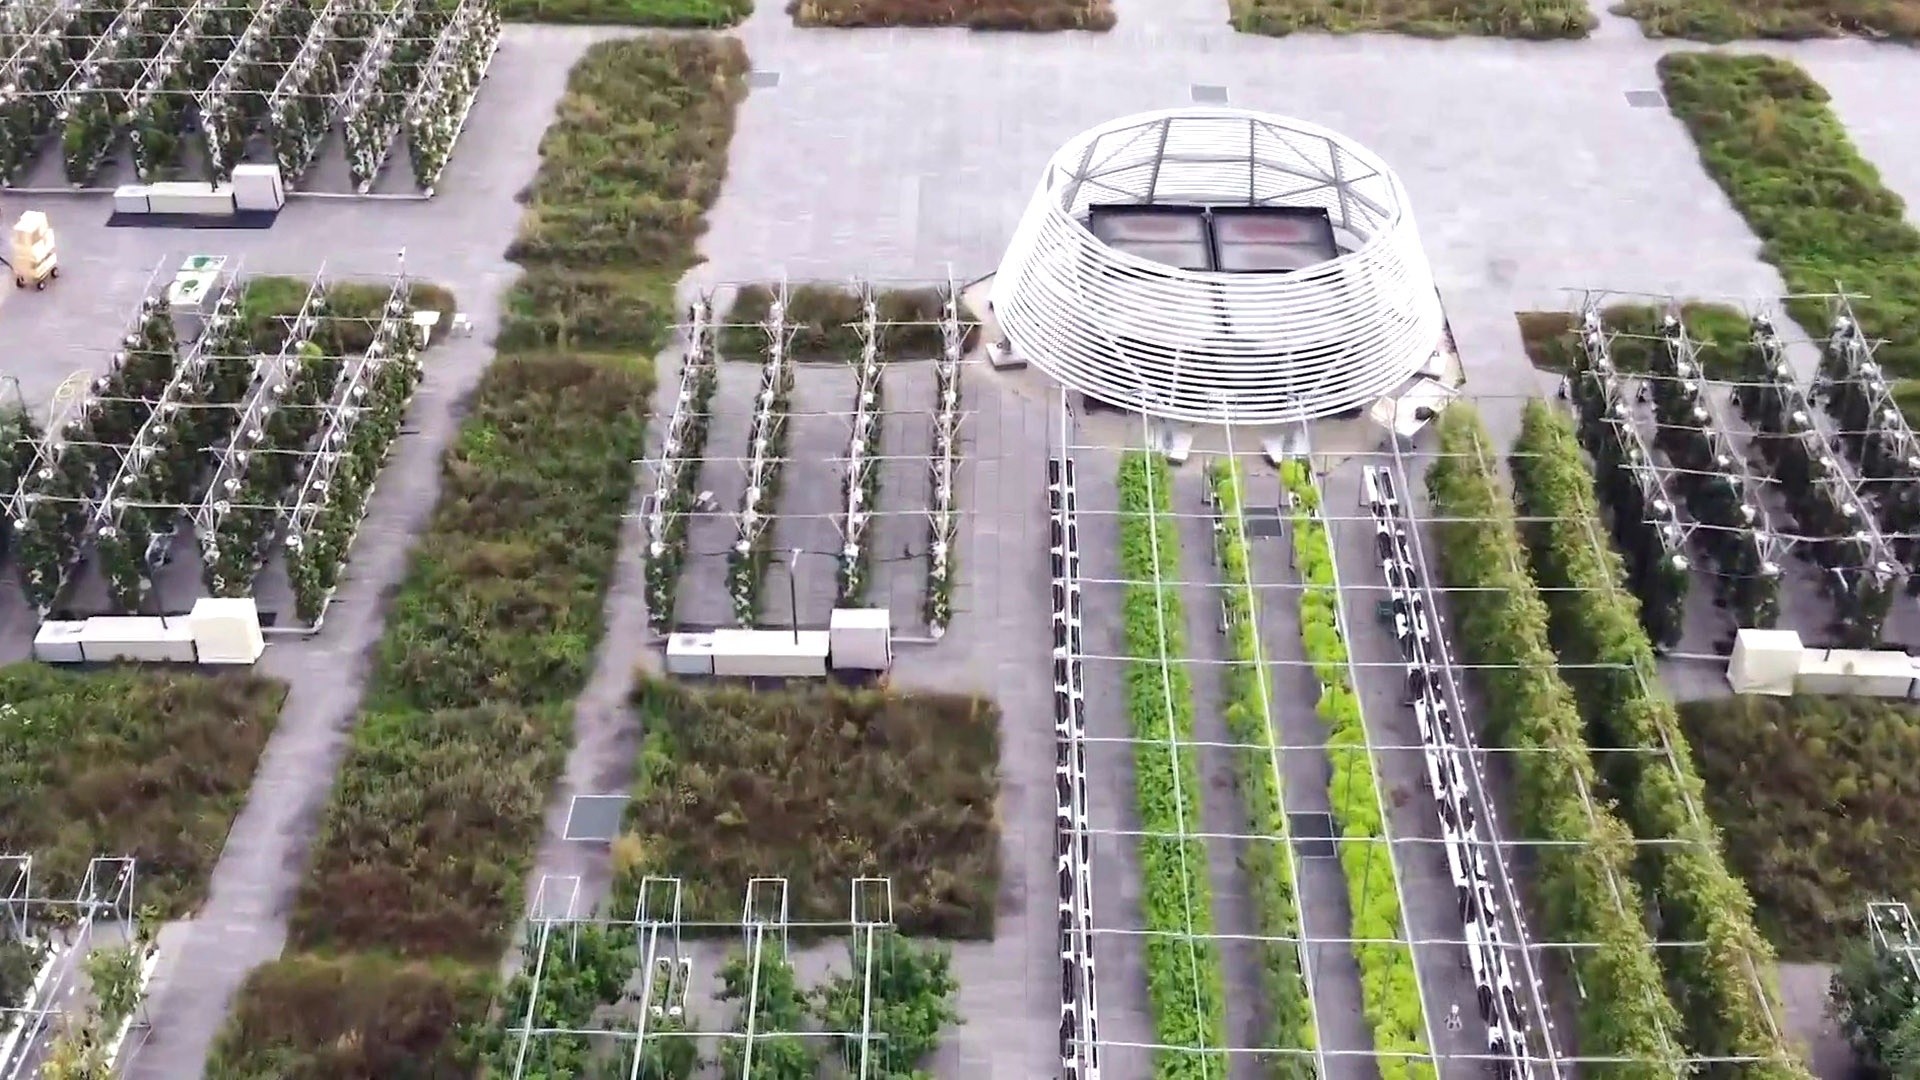 Scientists Used This Rooftop Garden Hack to Grow Bigger Plants